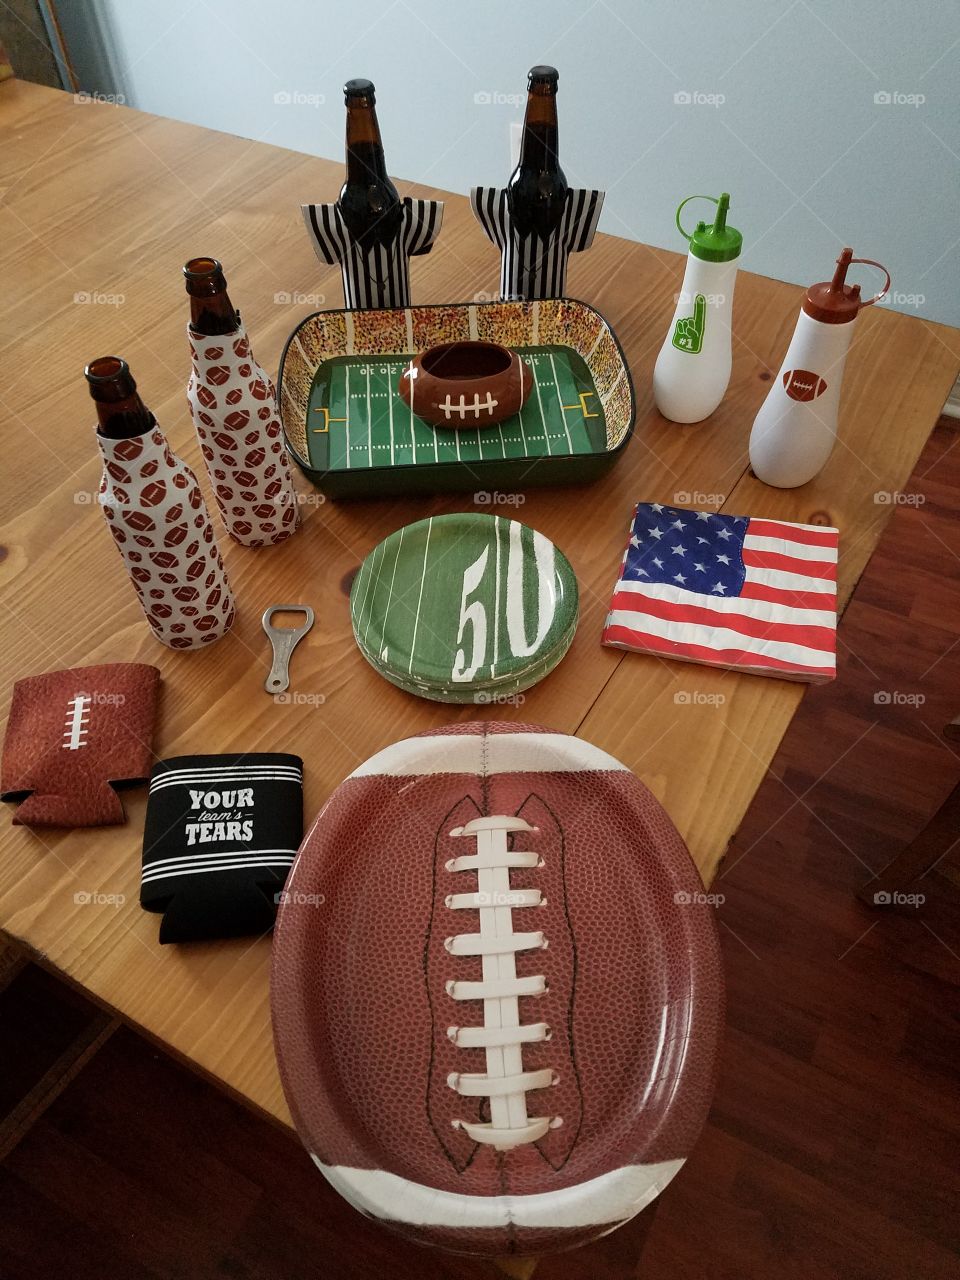 Super Bowl party preparations football paper plates napkins beer koozies ceramic football chip and dip bowl bottle opener